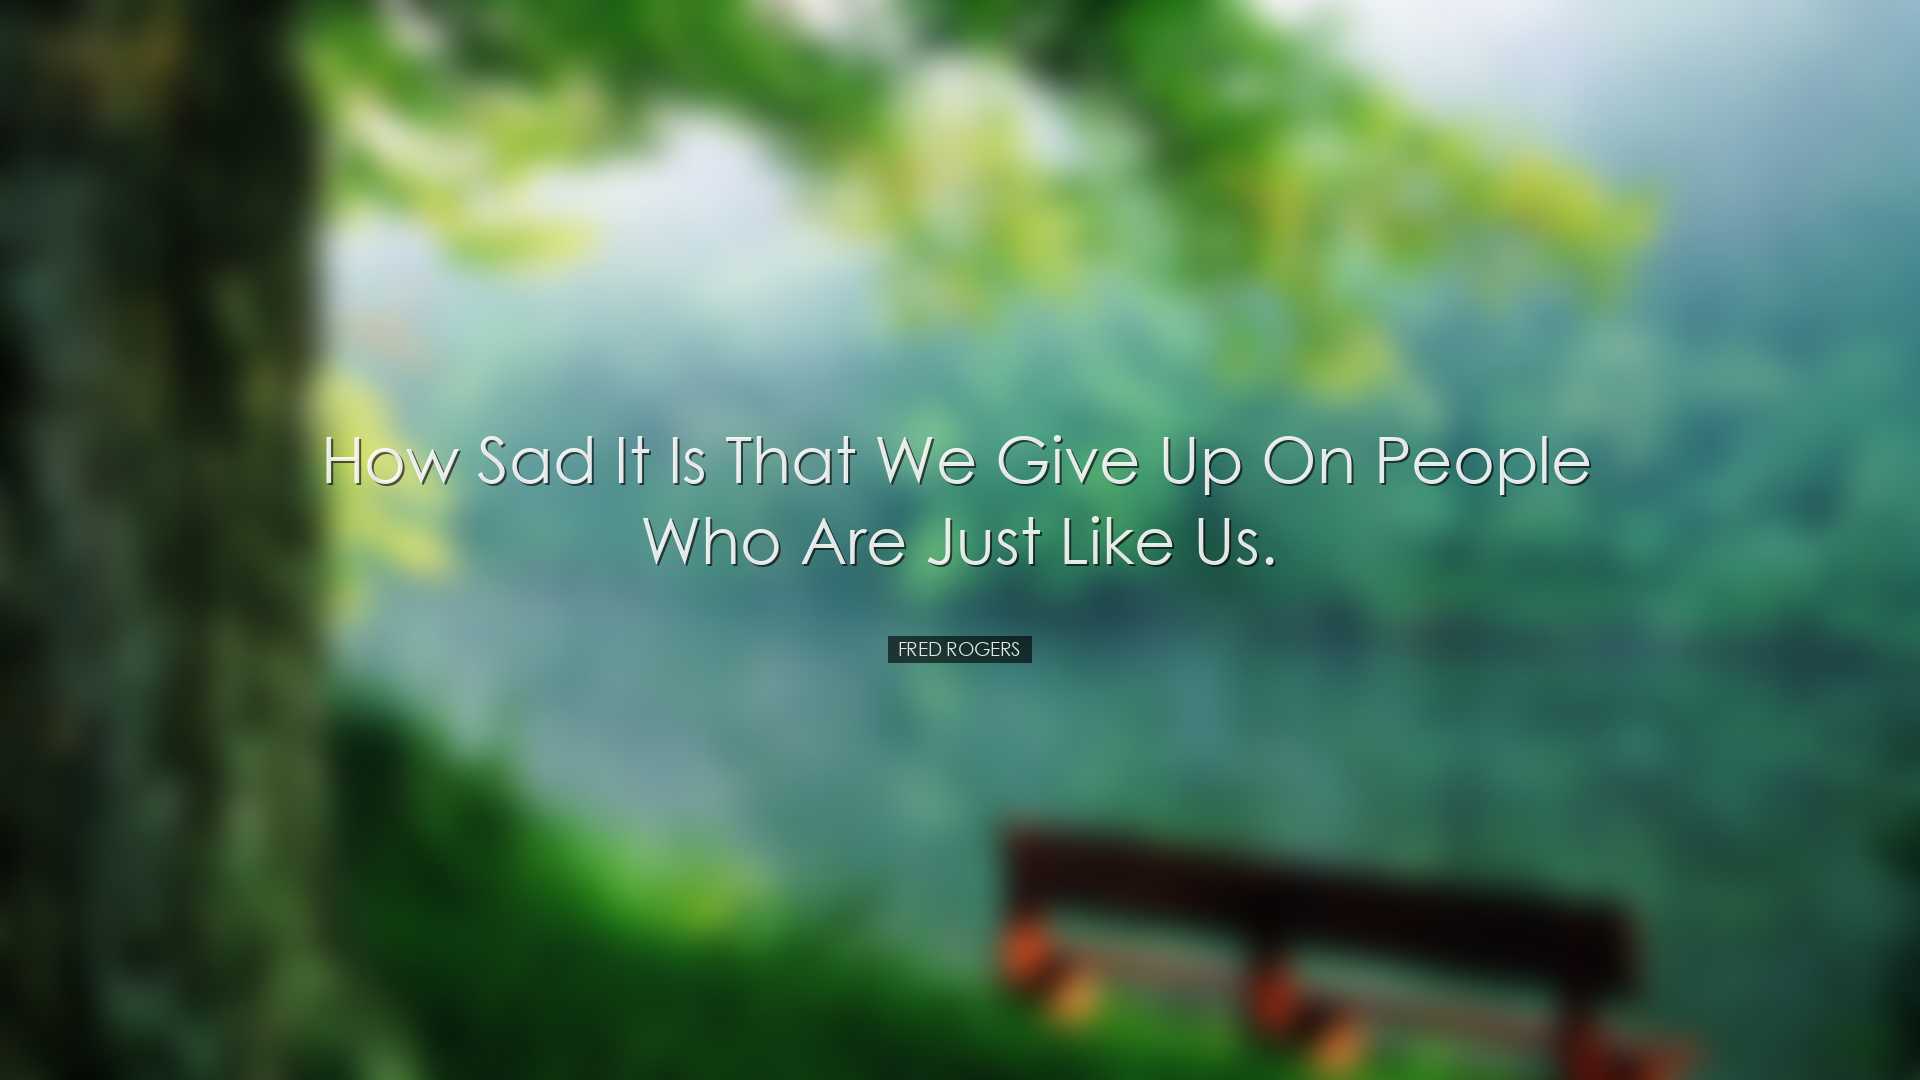 How sad it is that we give up on people who are just like us. - Fr